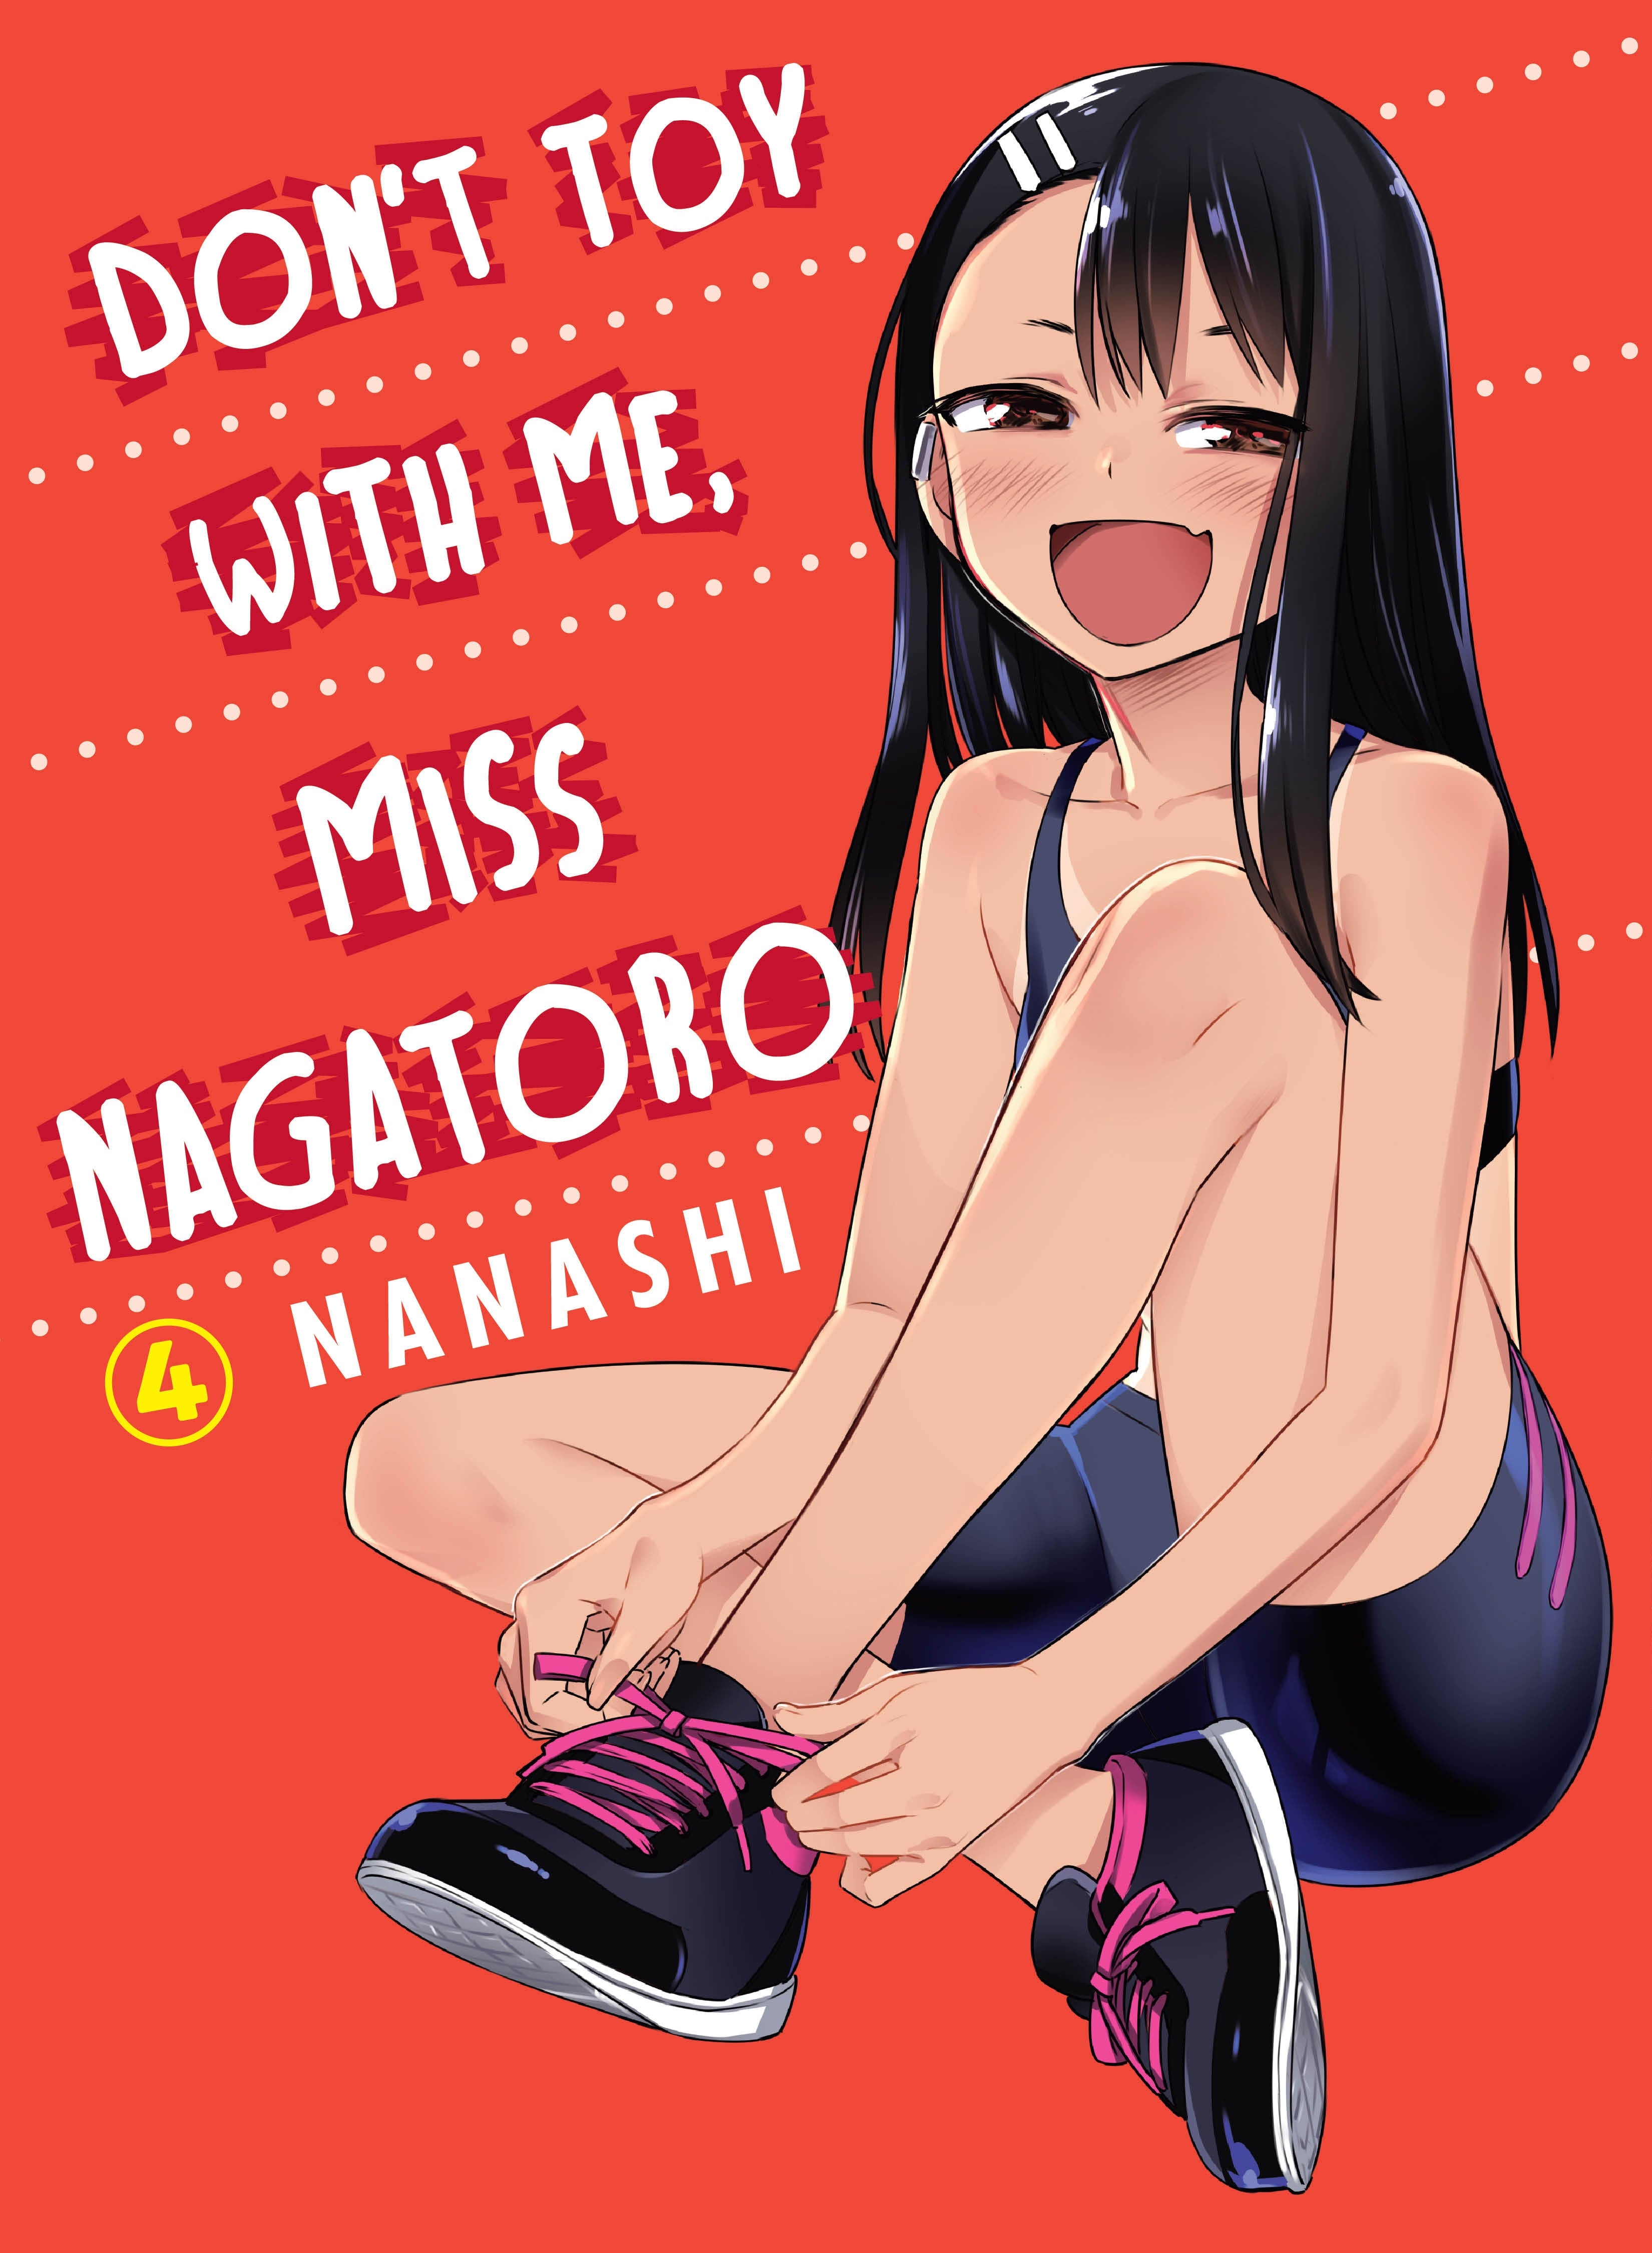 Don't Toy With Me : Miss Nagatoro, Vol. 4